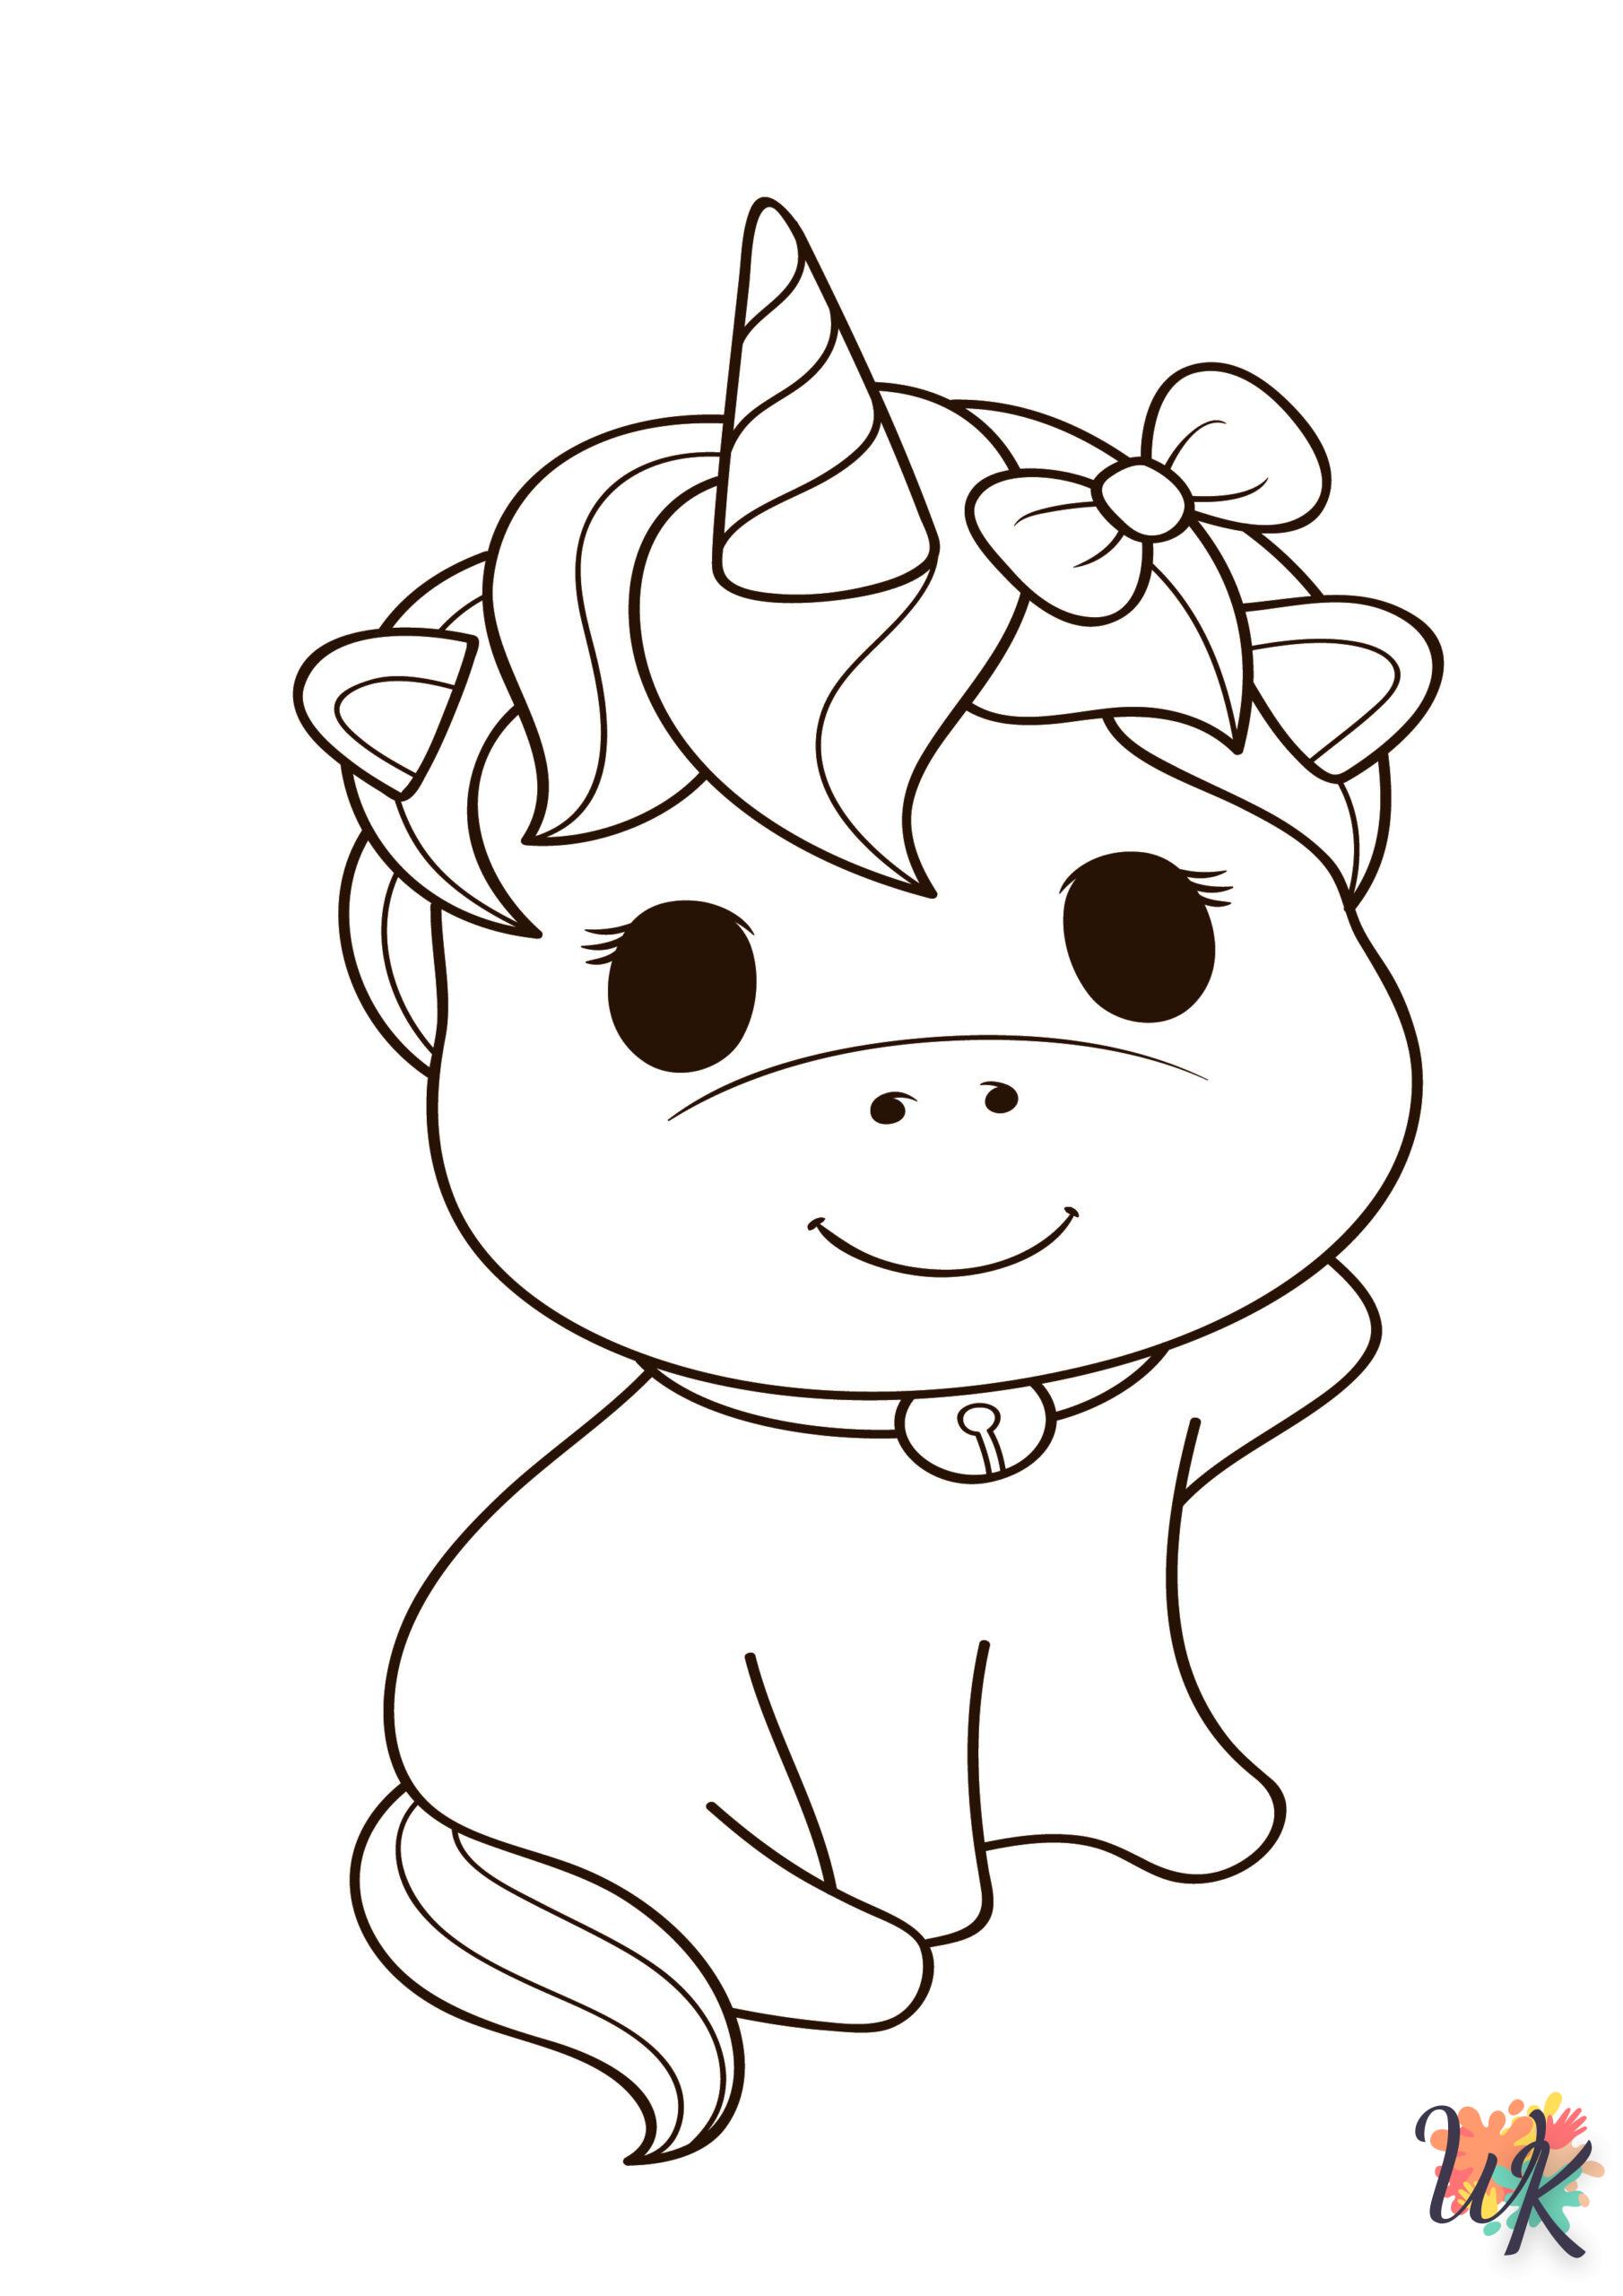 Unicorn coloring pages for adults pdf